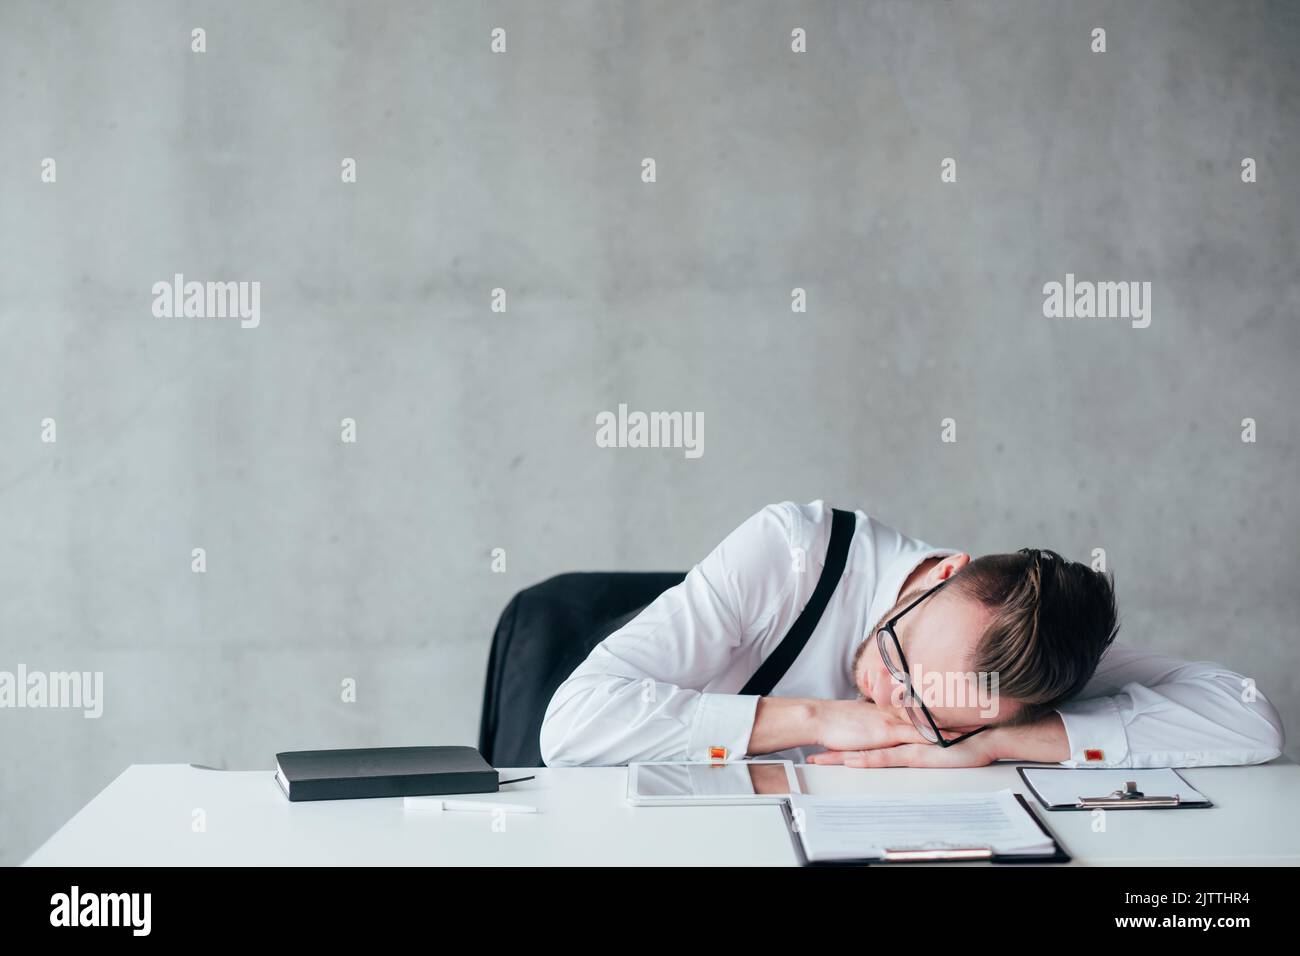 overloaded schedule routine sleeping tired guy Stock Photo